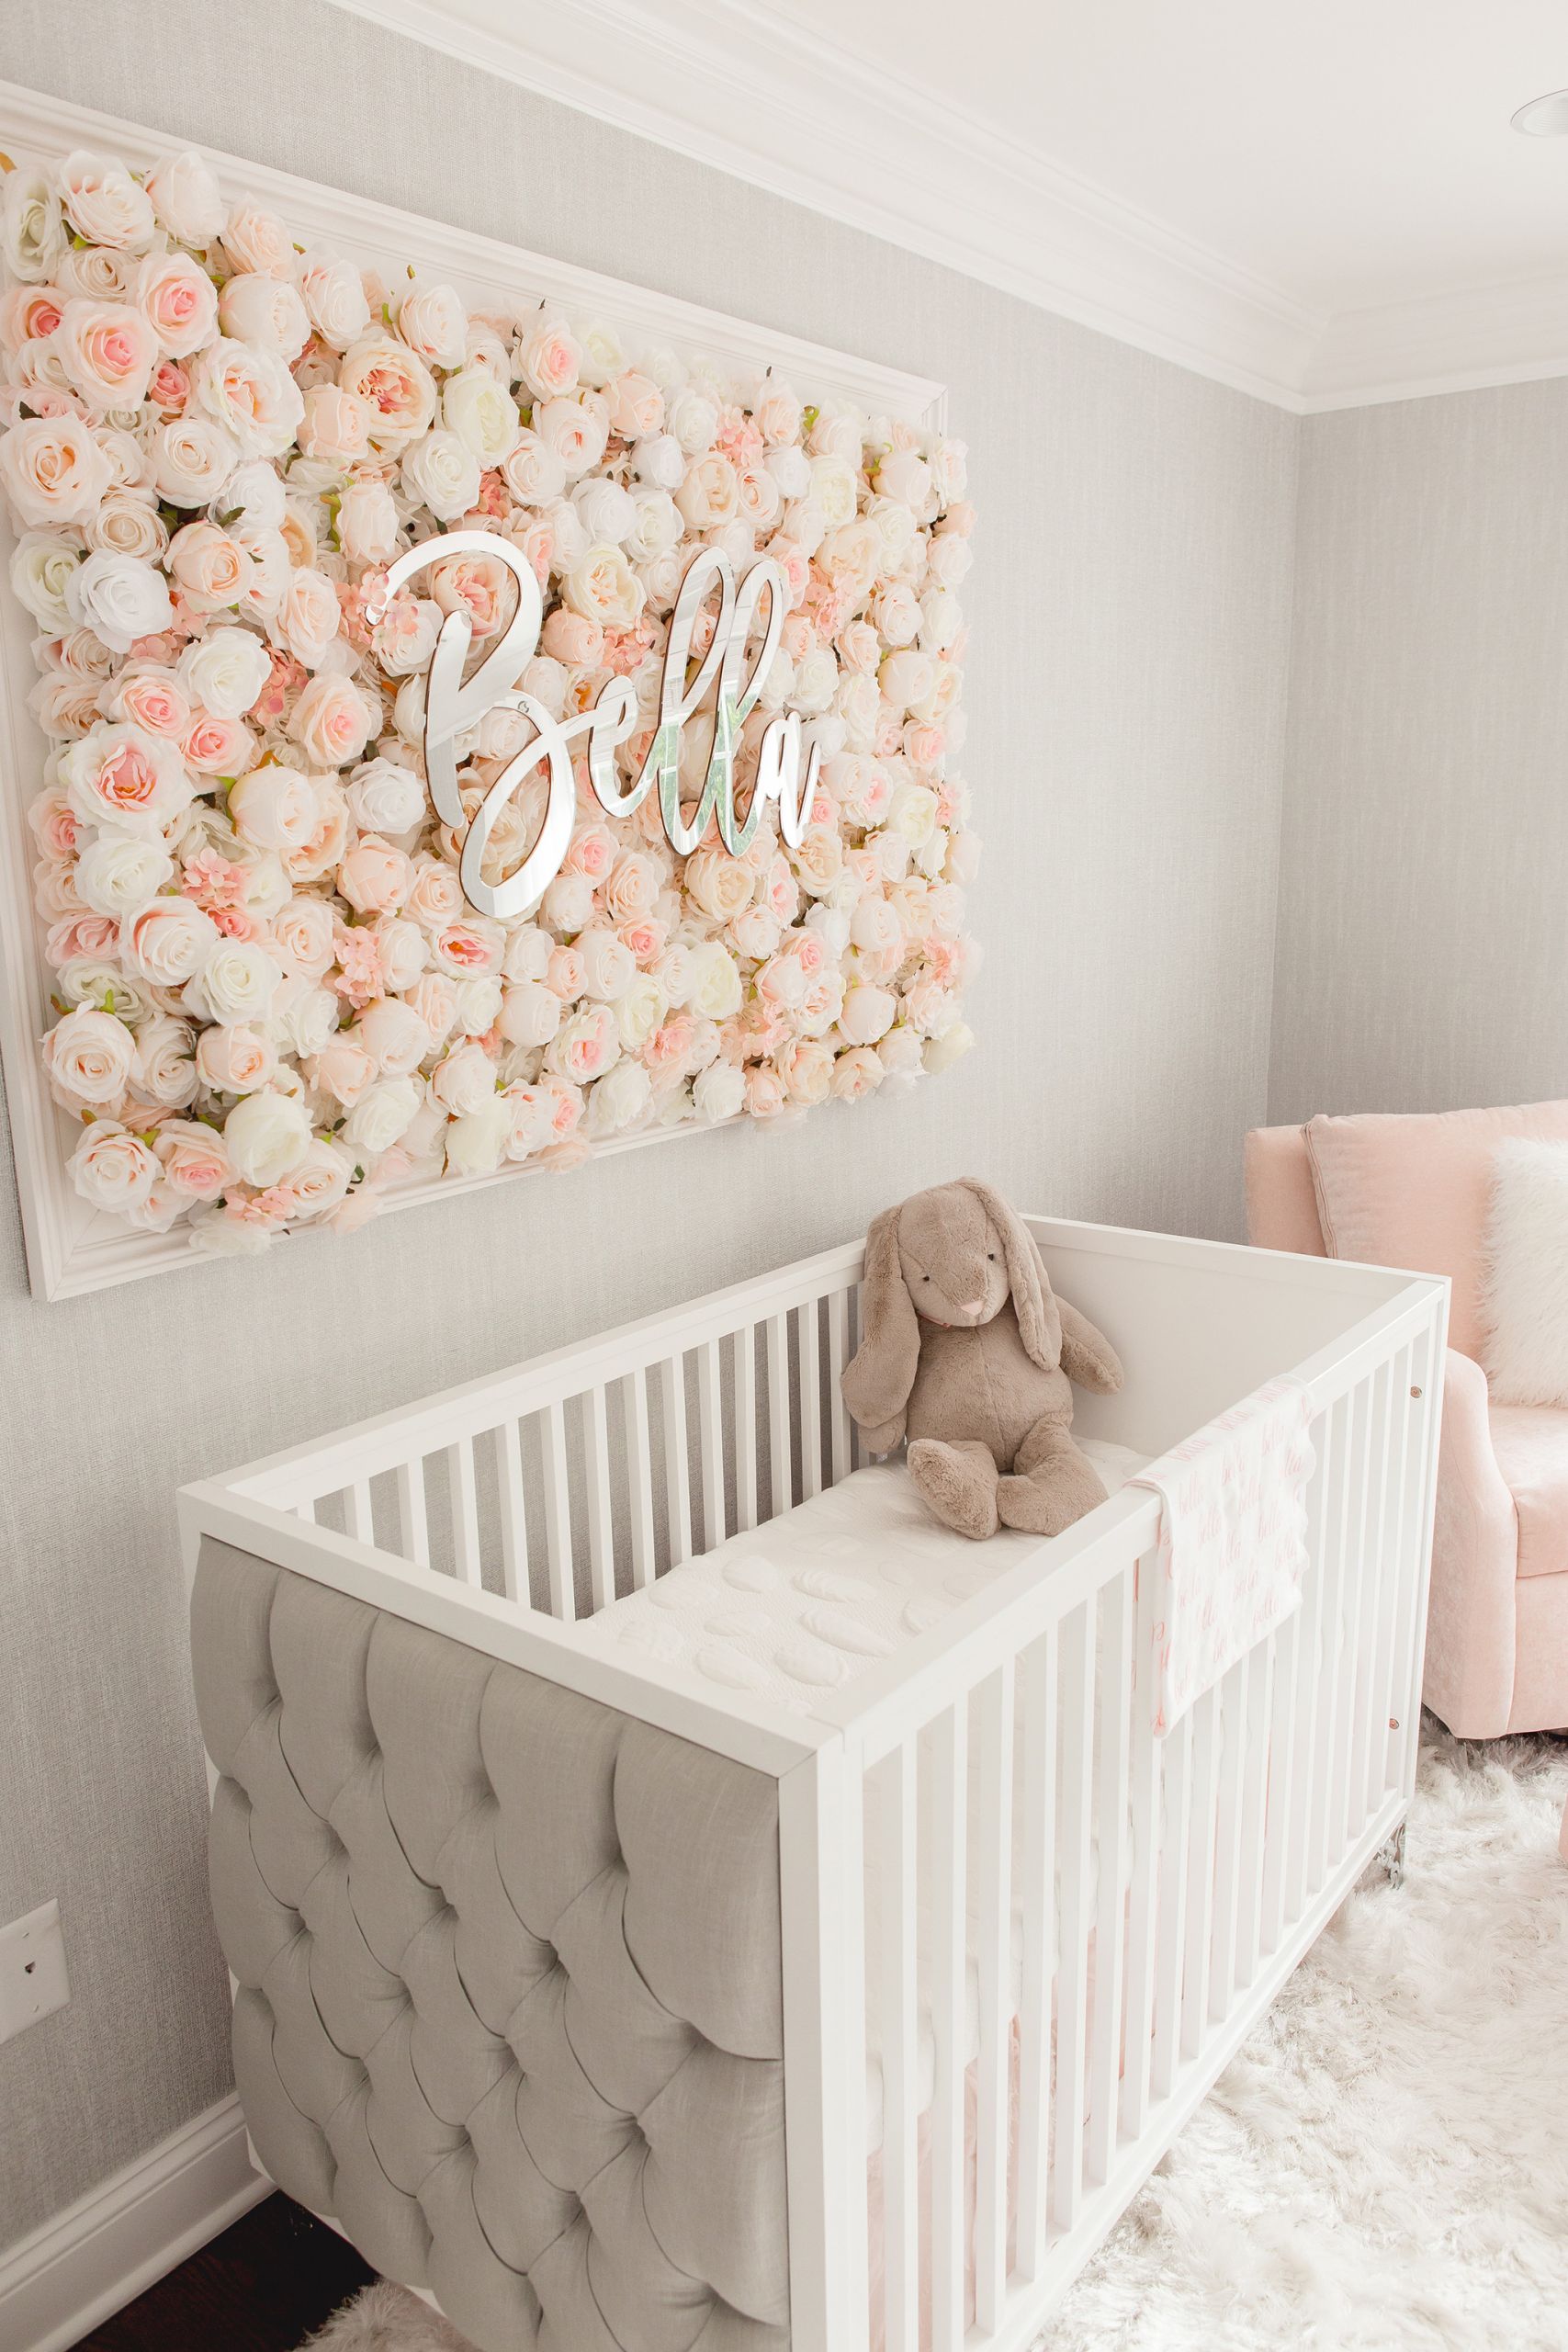 Baby Room Wall Decor Ideas
 Guess Which Celebrity Nursery Inspired this Gorgeous Space